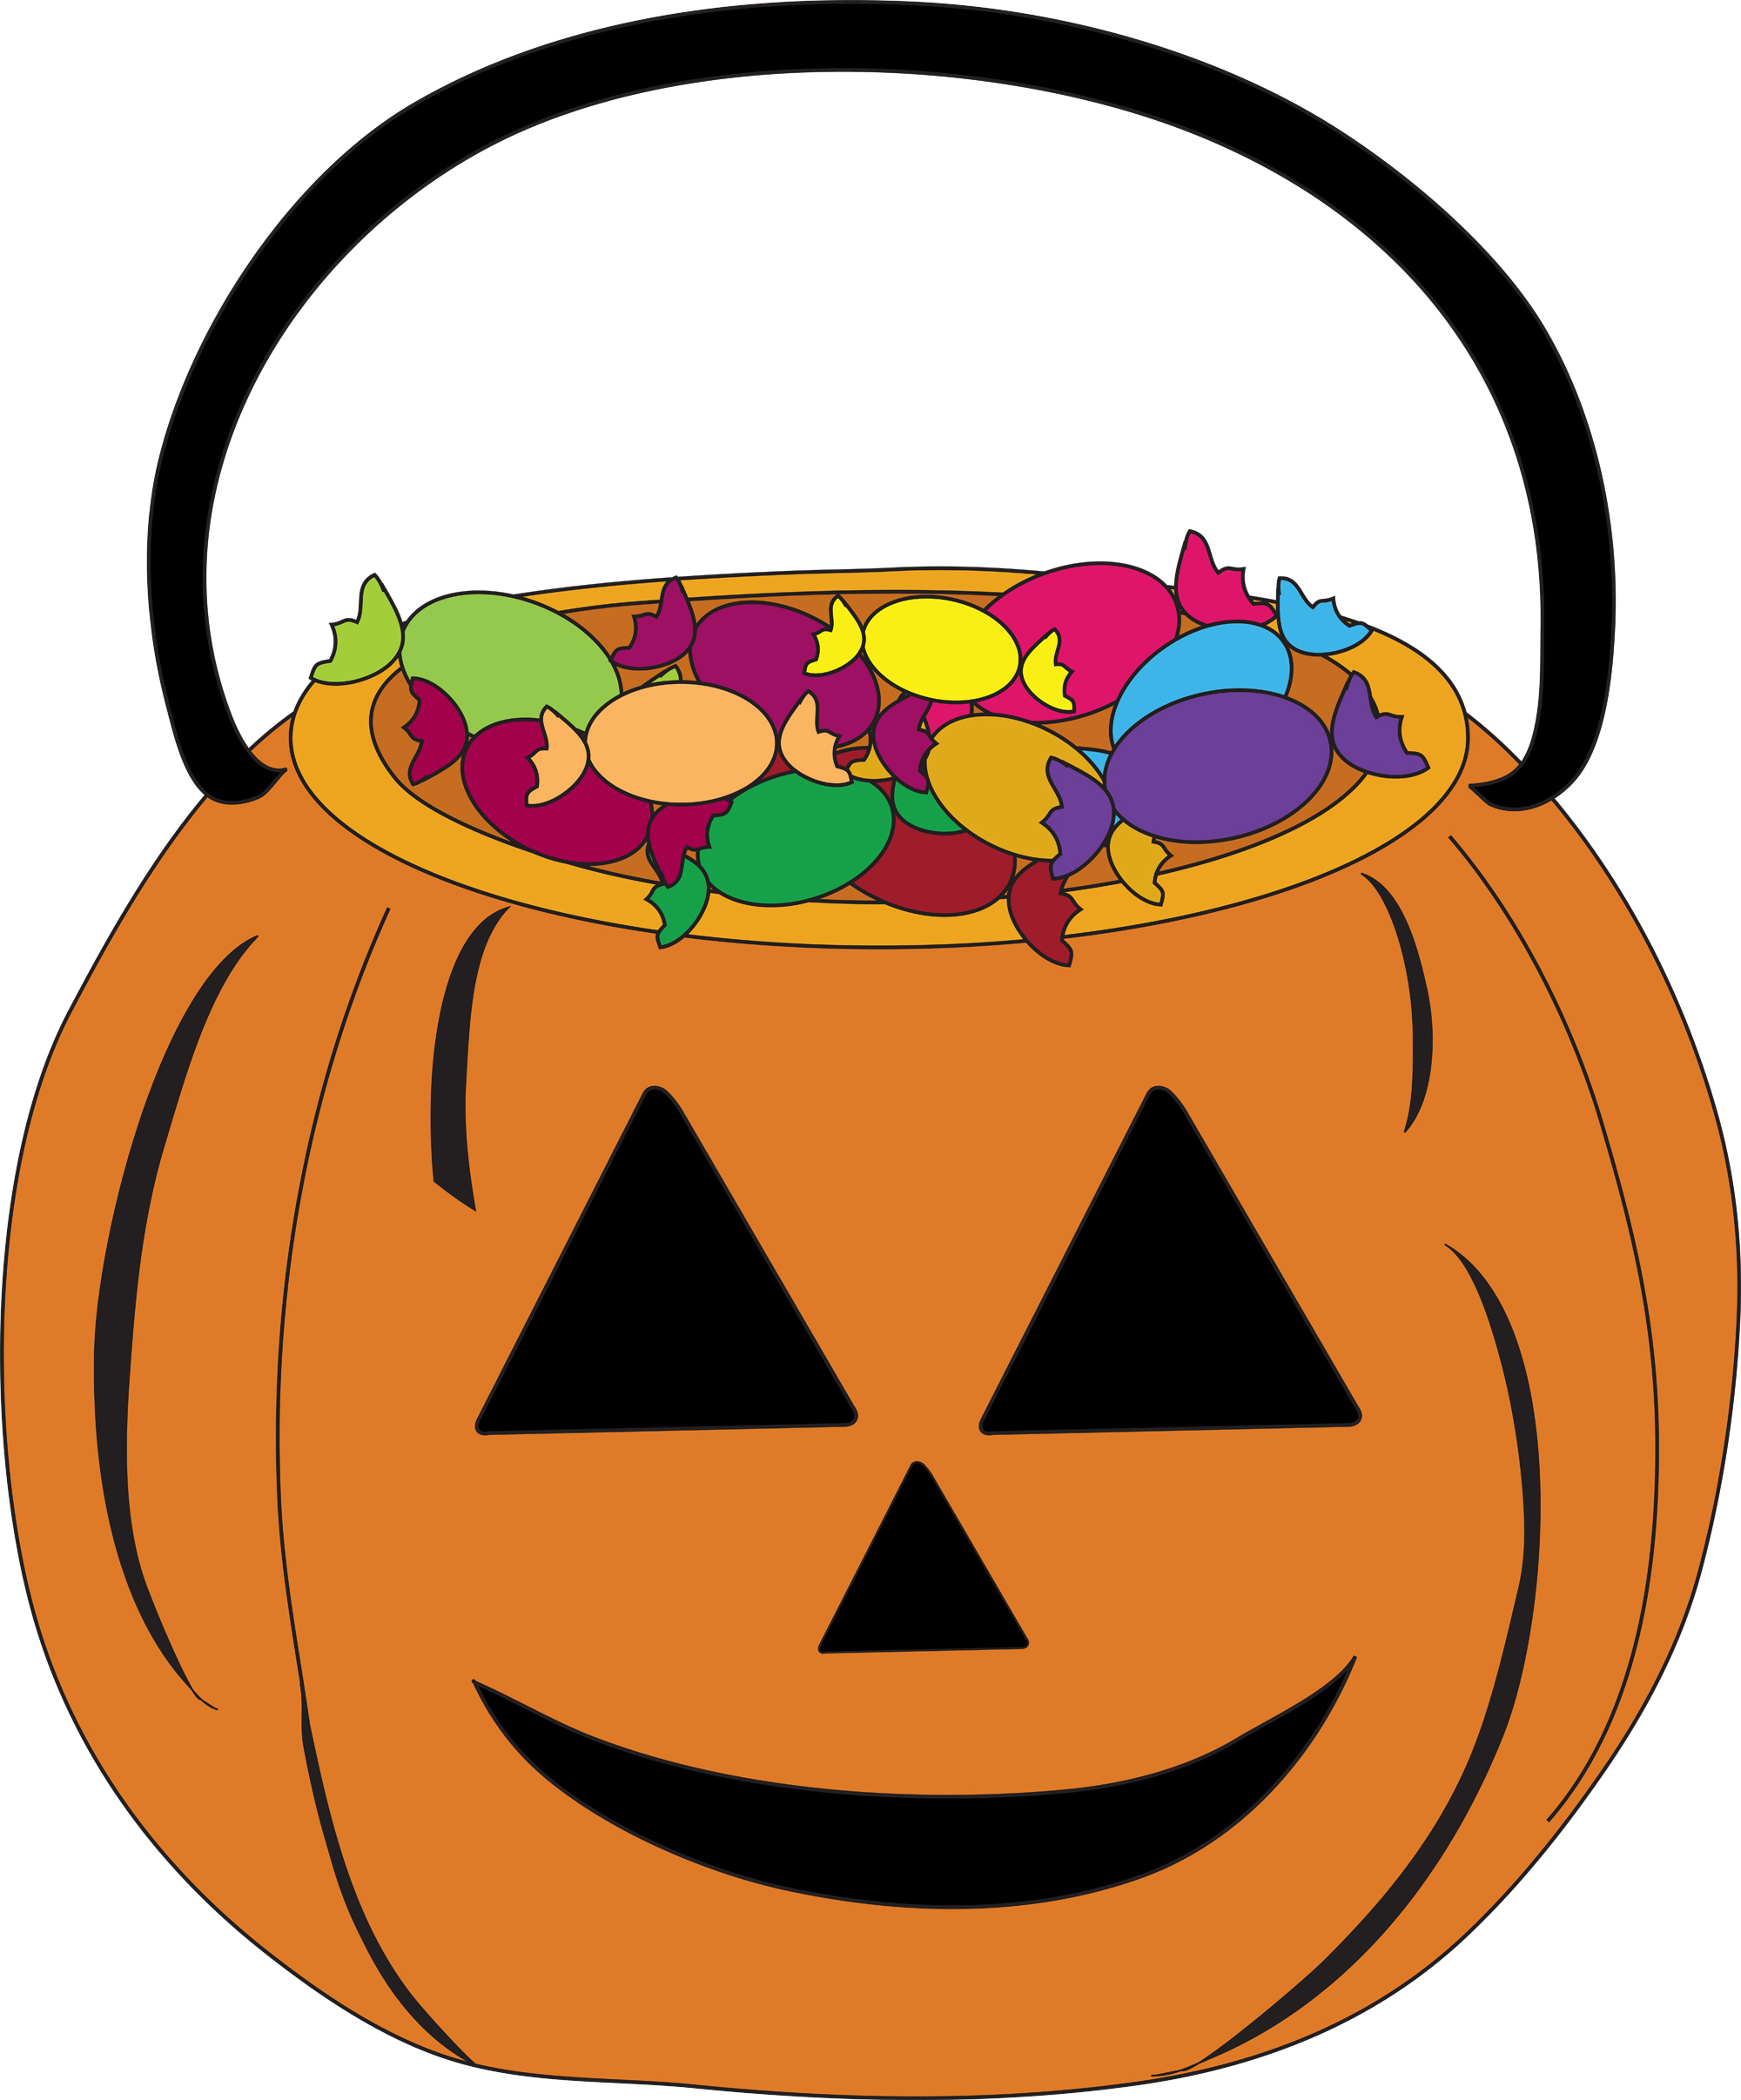 Candy corn halloween candyrn clipart free images 3 clipartix